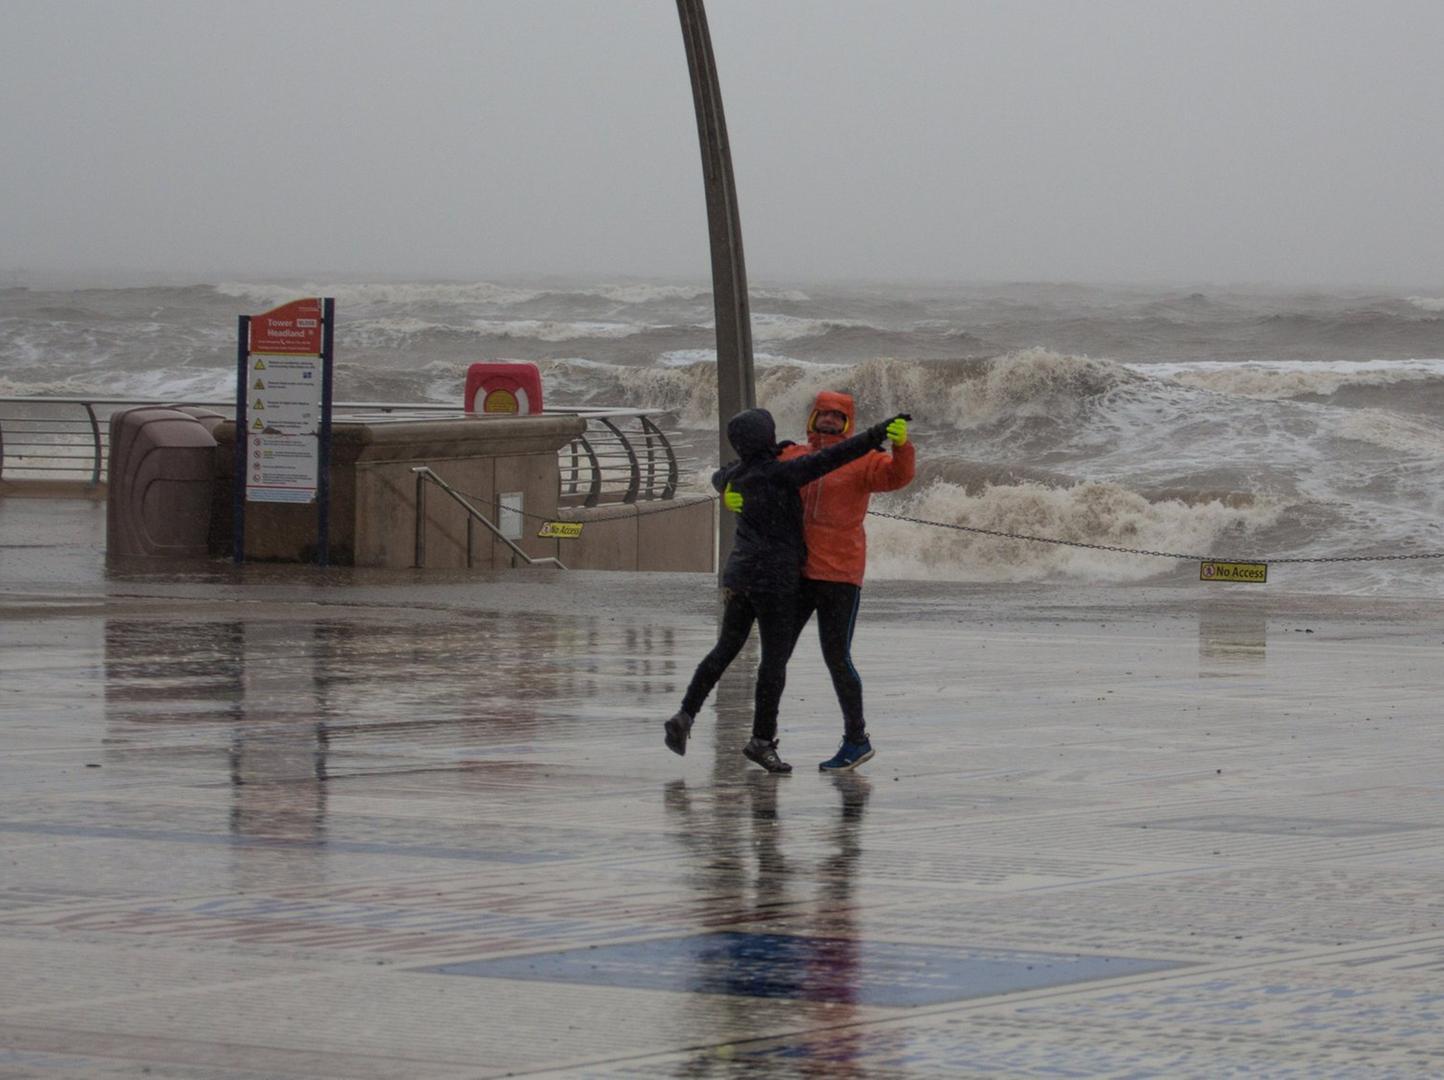 This couple dancing on Blackpool promenade was also snapped by Joseph Seager.